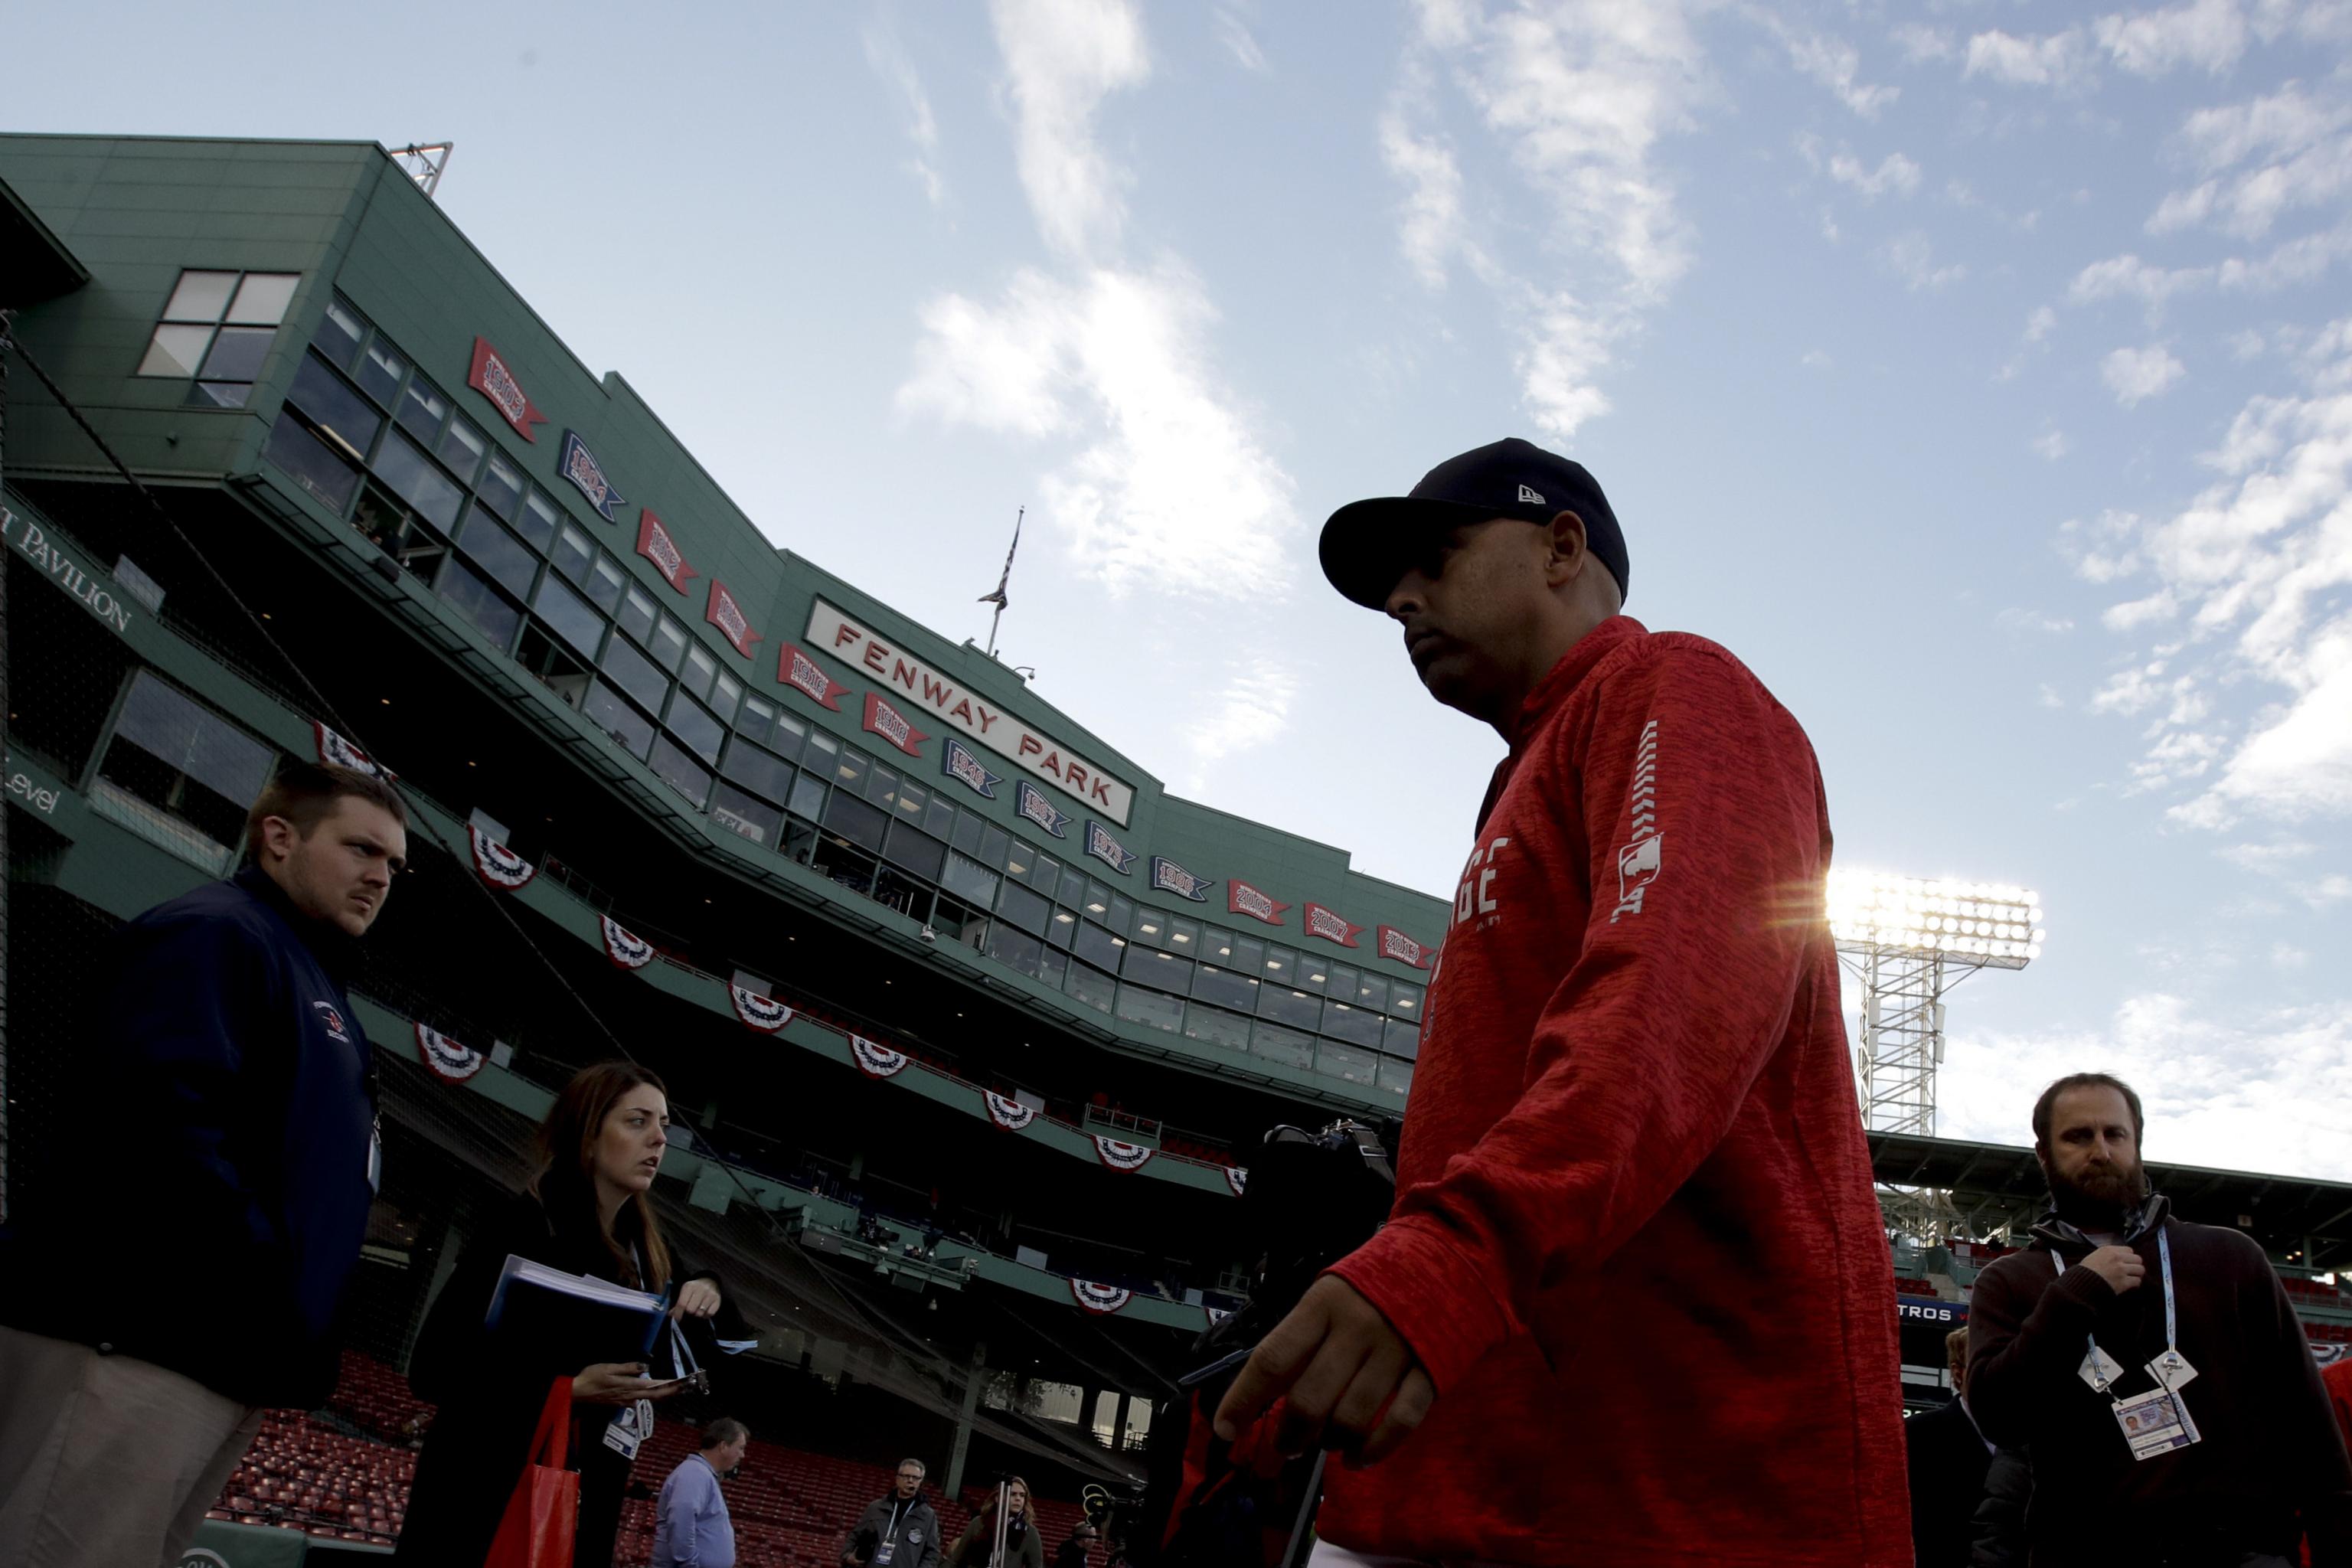 Red Sox manager Alex Cora calls out ESPN - Sports Illustrated